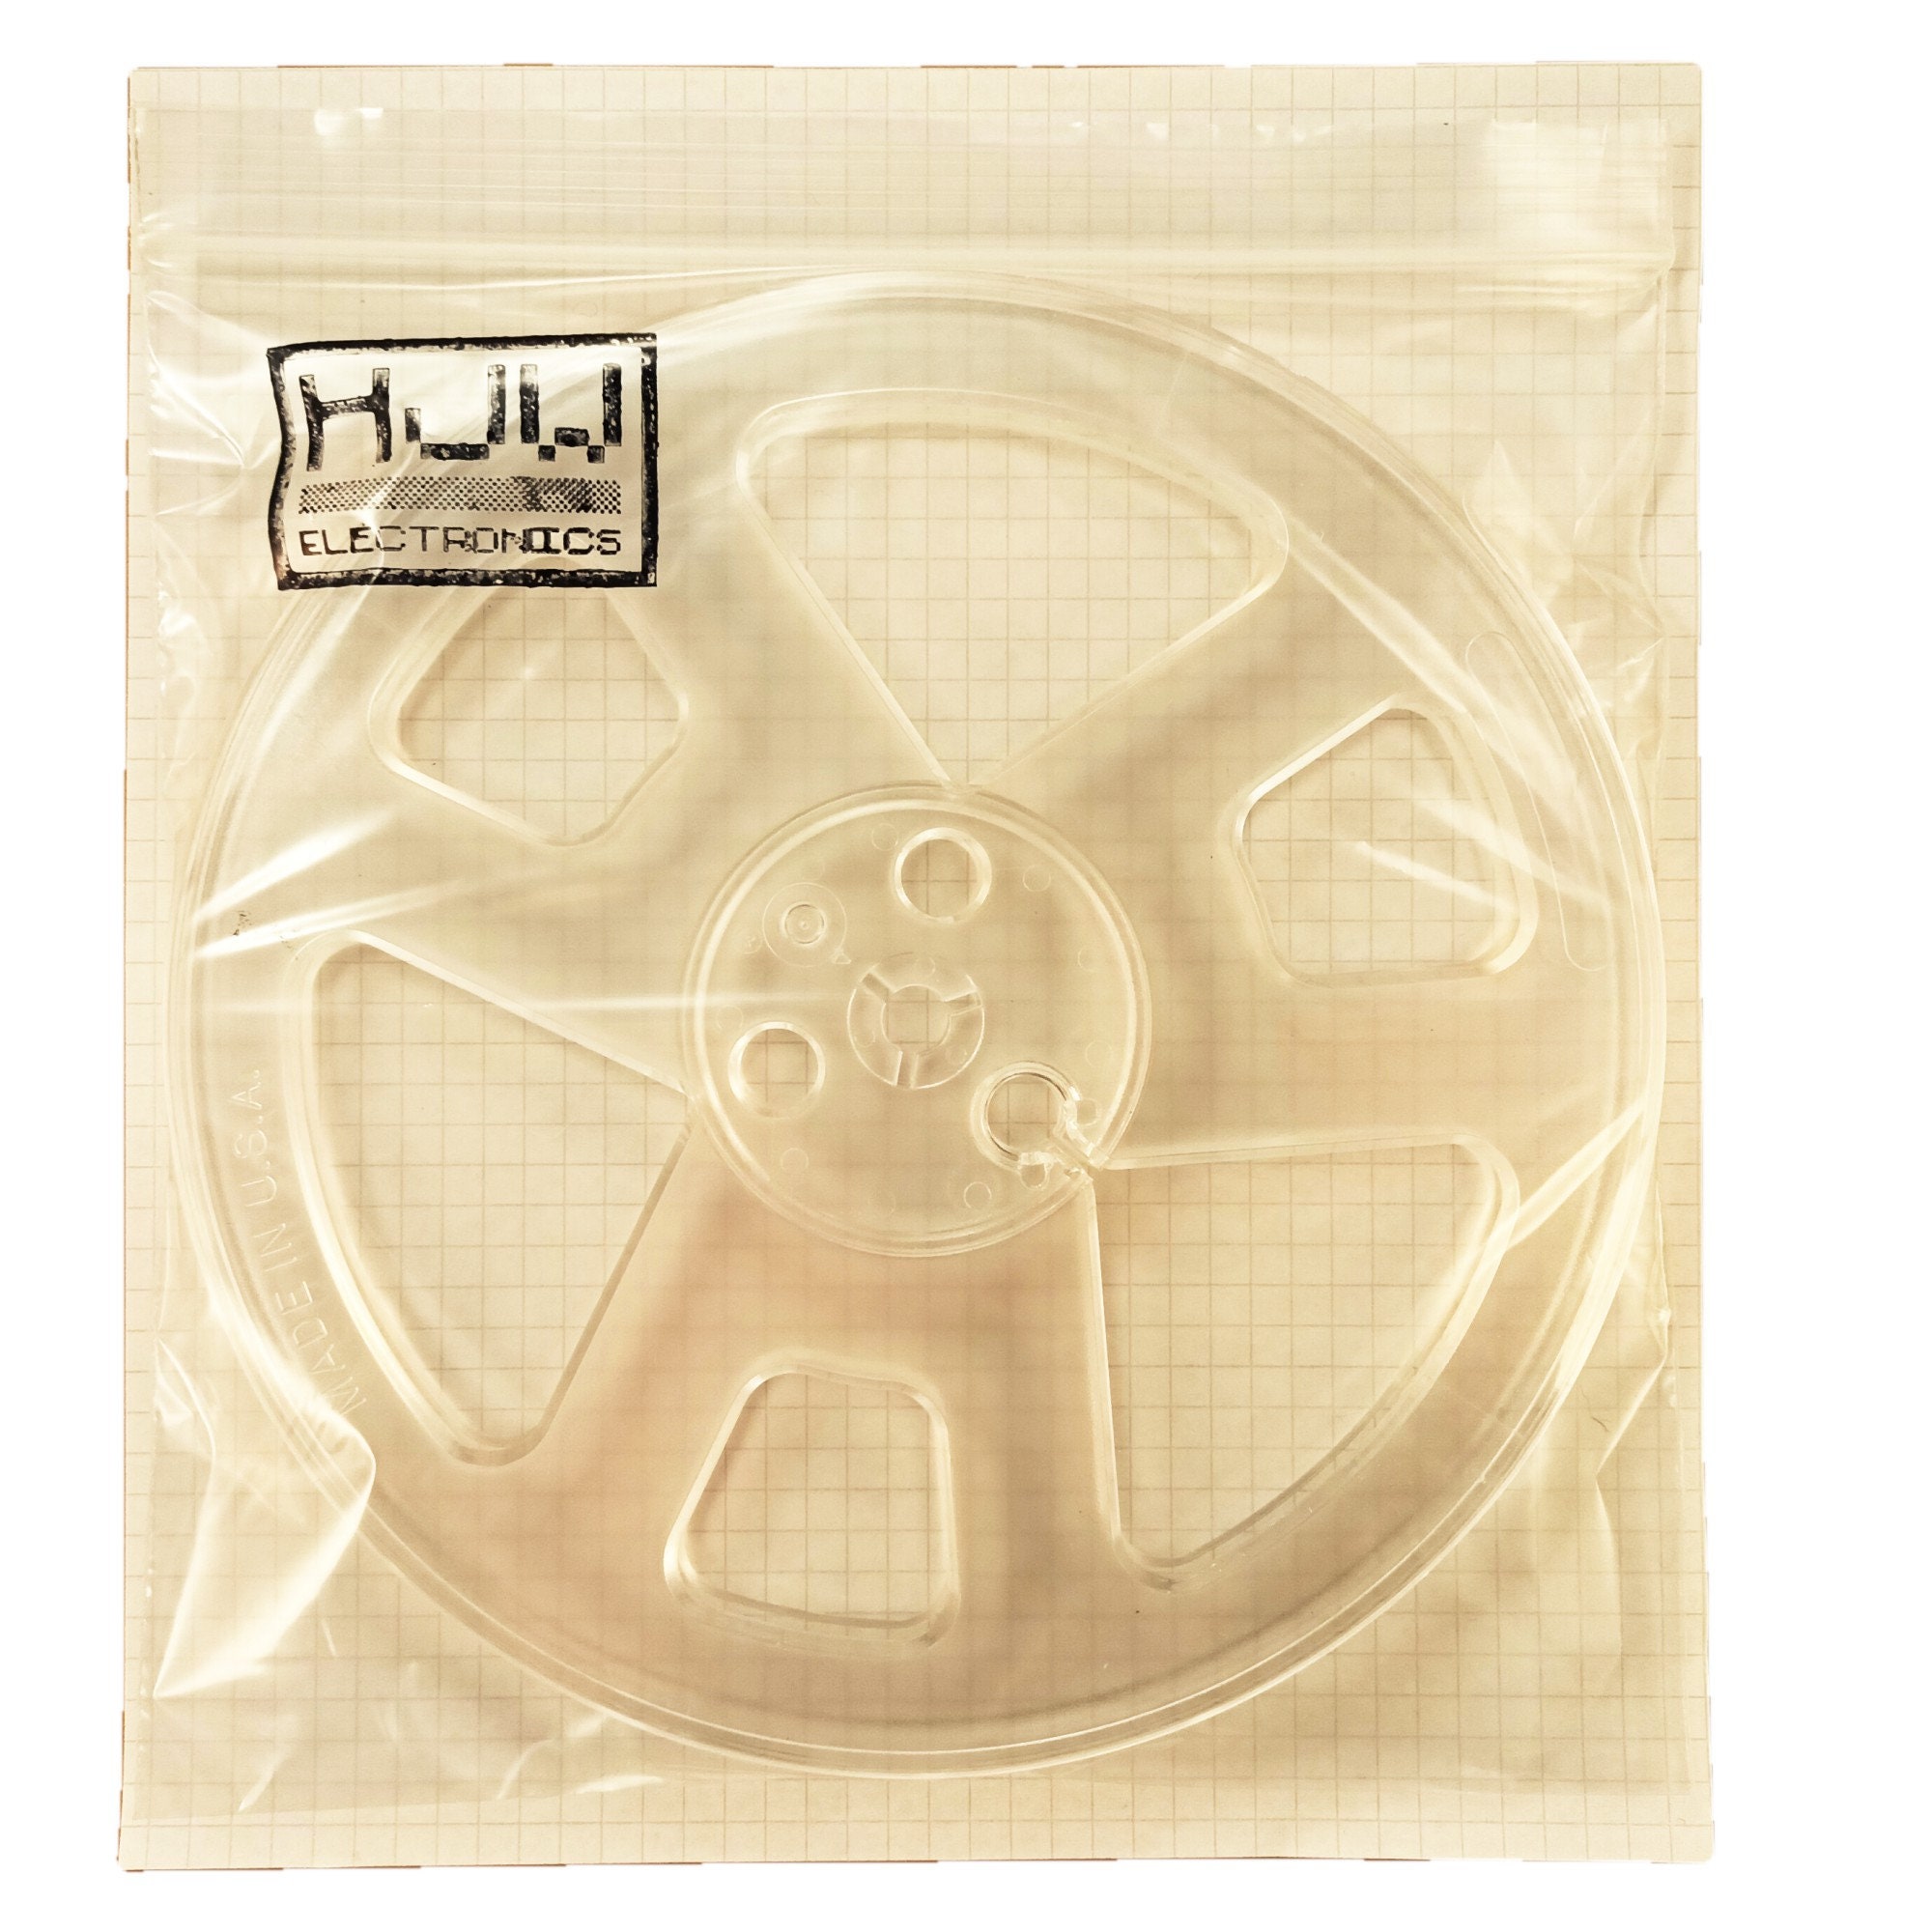 TINYSOME Metal Takeup Reel Opening Machine Parts 3 Hole 1/4 7 Inch Empty  Reel for Reel To Reel Tape Recorder 